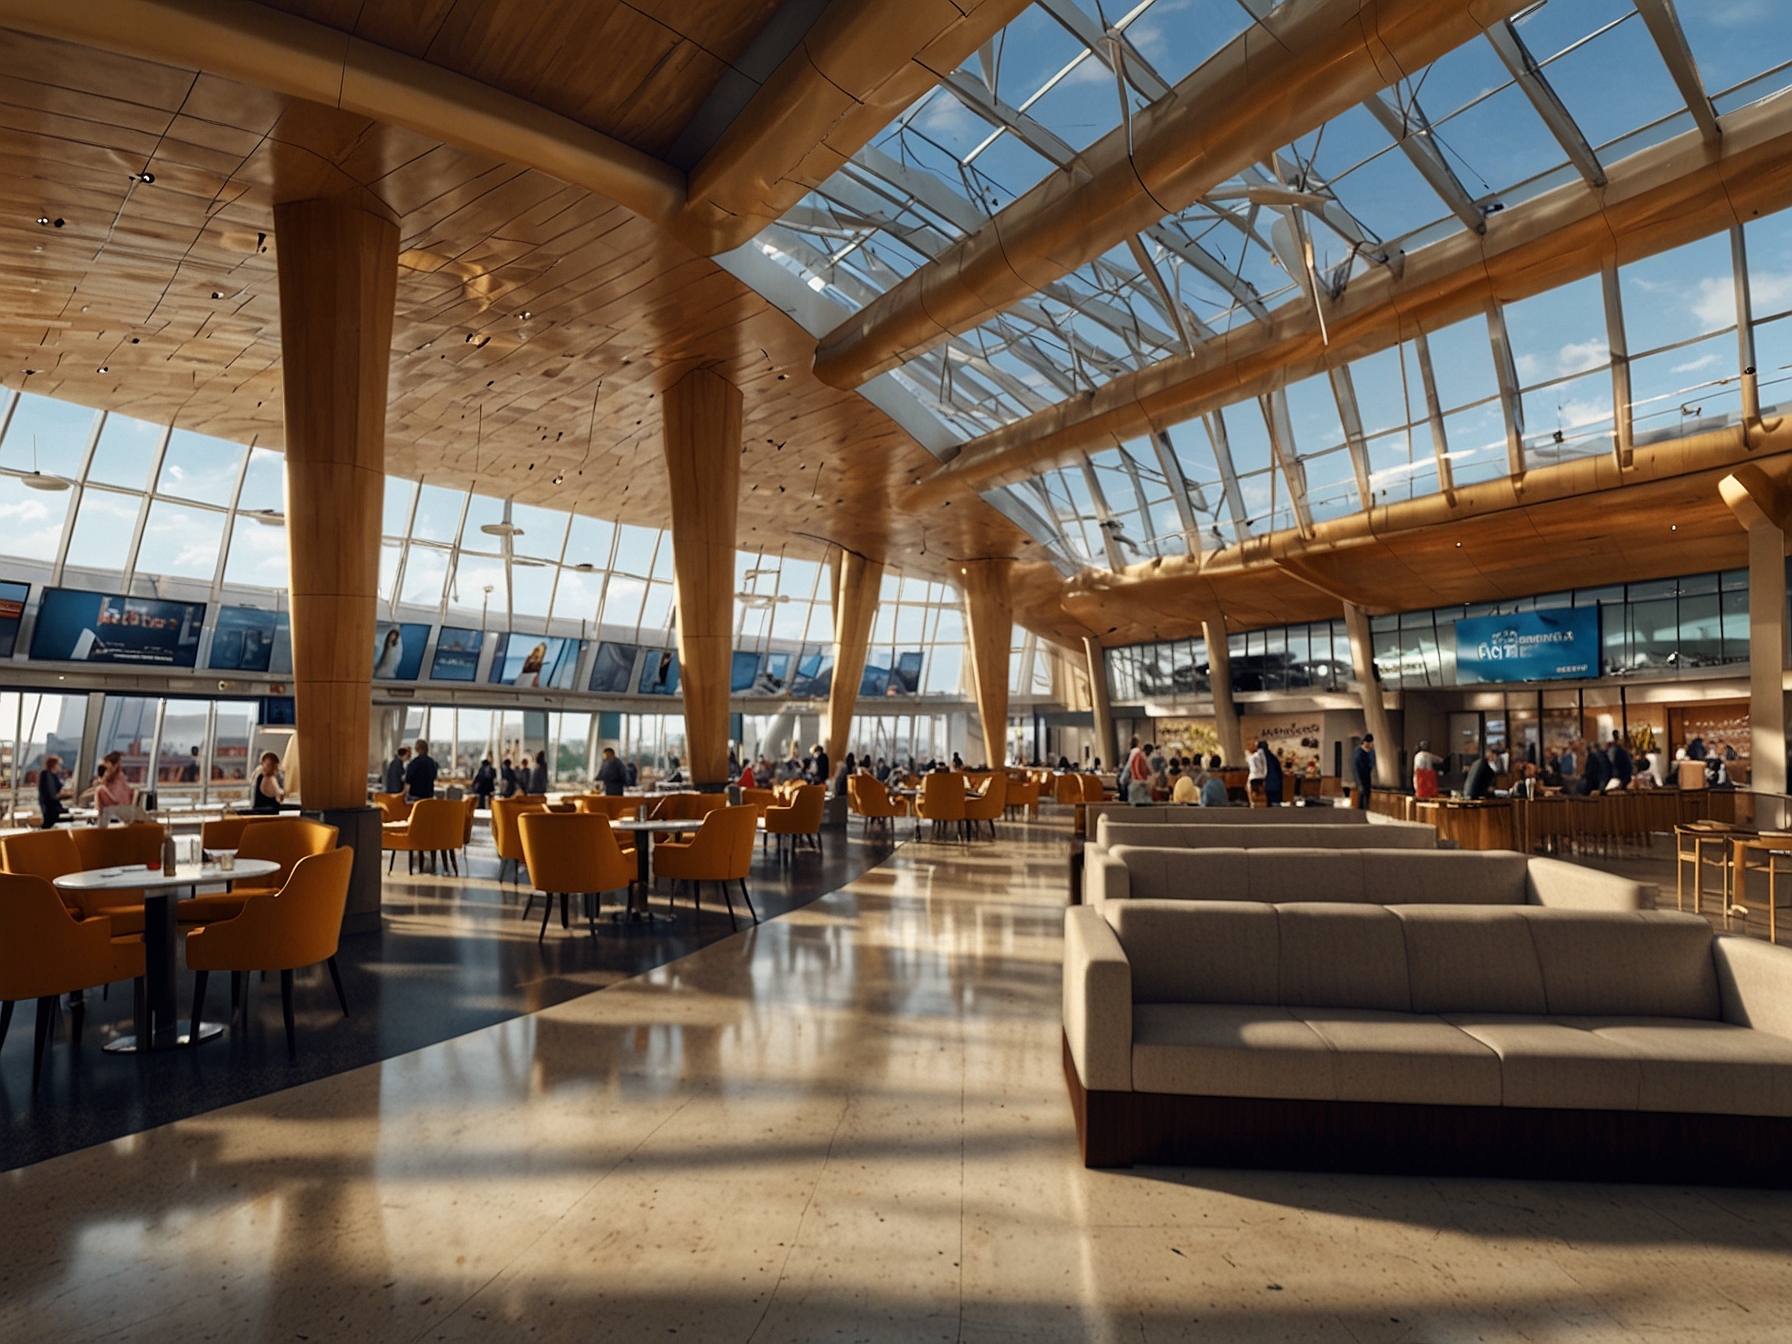 An artist's rendering of London Southend Airport's new terminal facilities, showcasing modern architecture, spacious lounges, and an array of retail and dining options designed to enhance passenger experience.